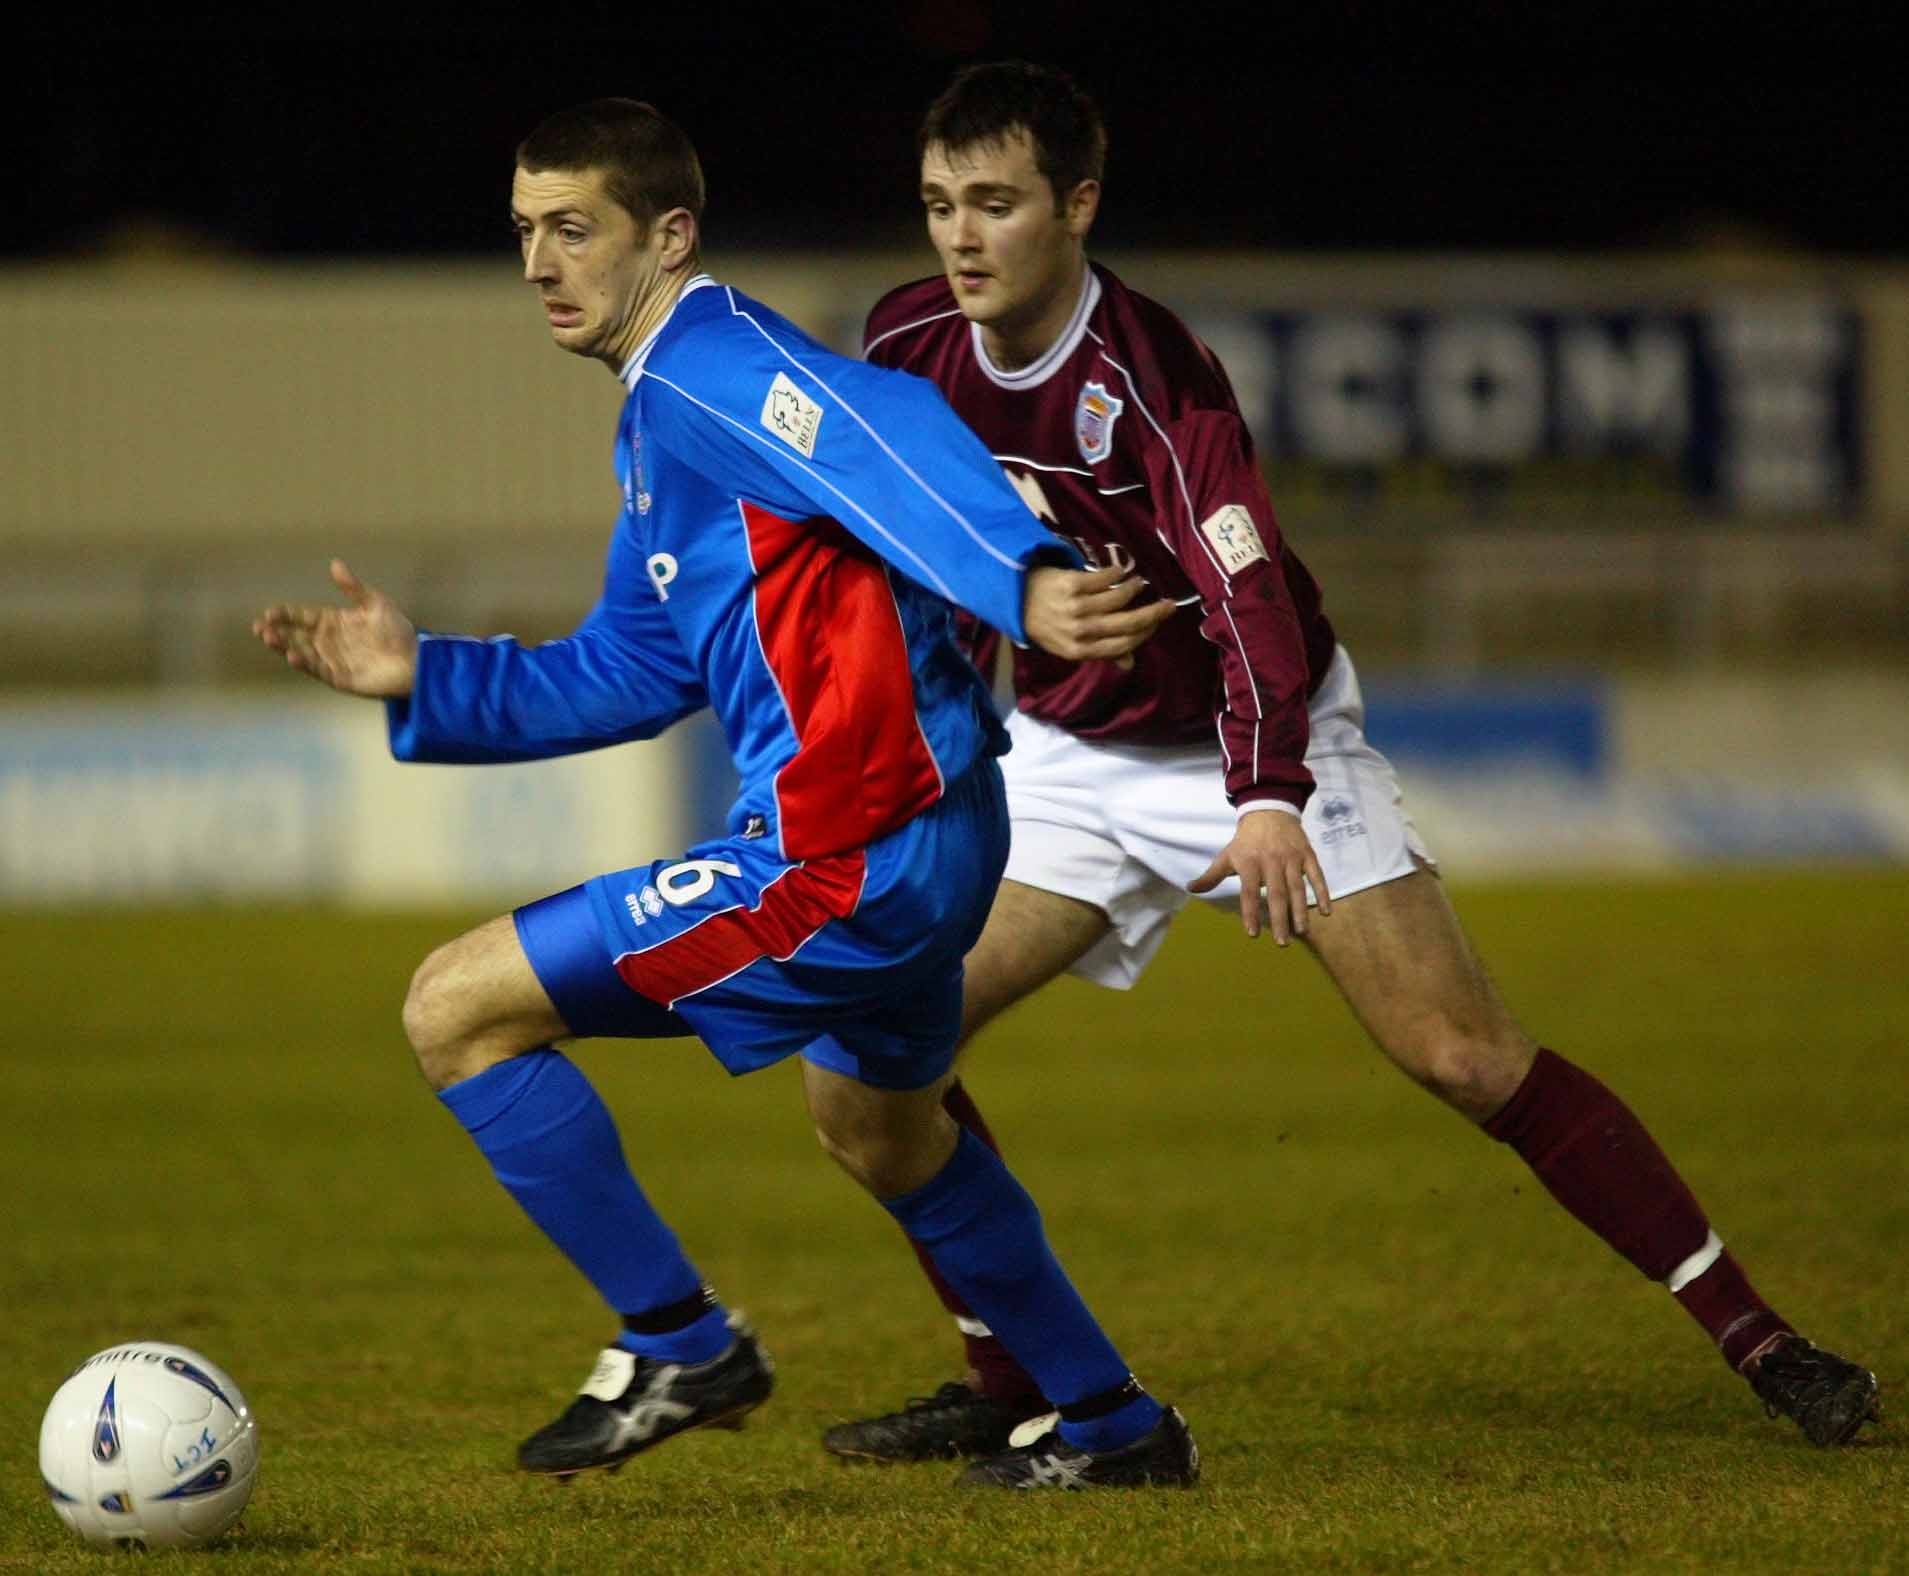 ICT's Roy McBain gets away from Arbroath's Ed Forrest during a league match in the 2002-3 season.